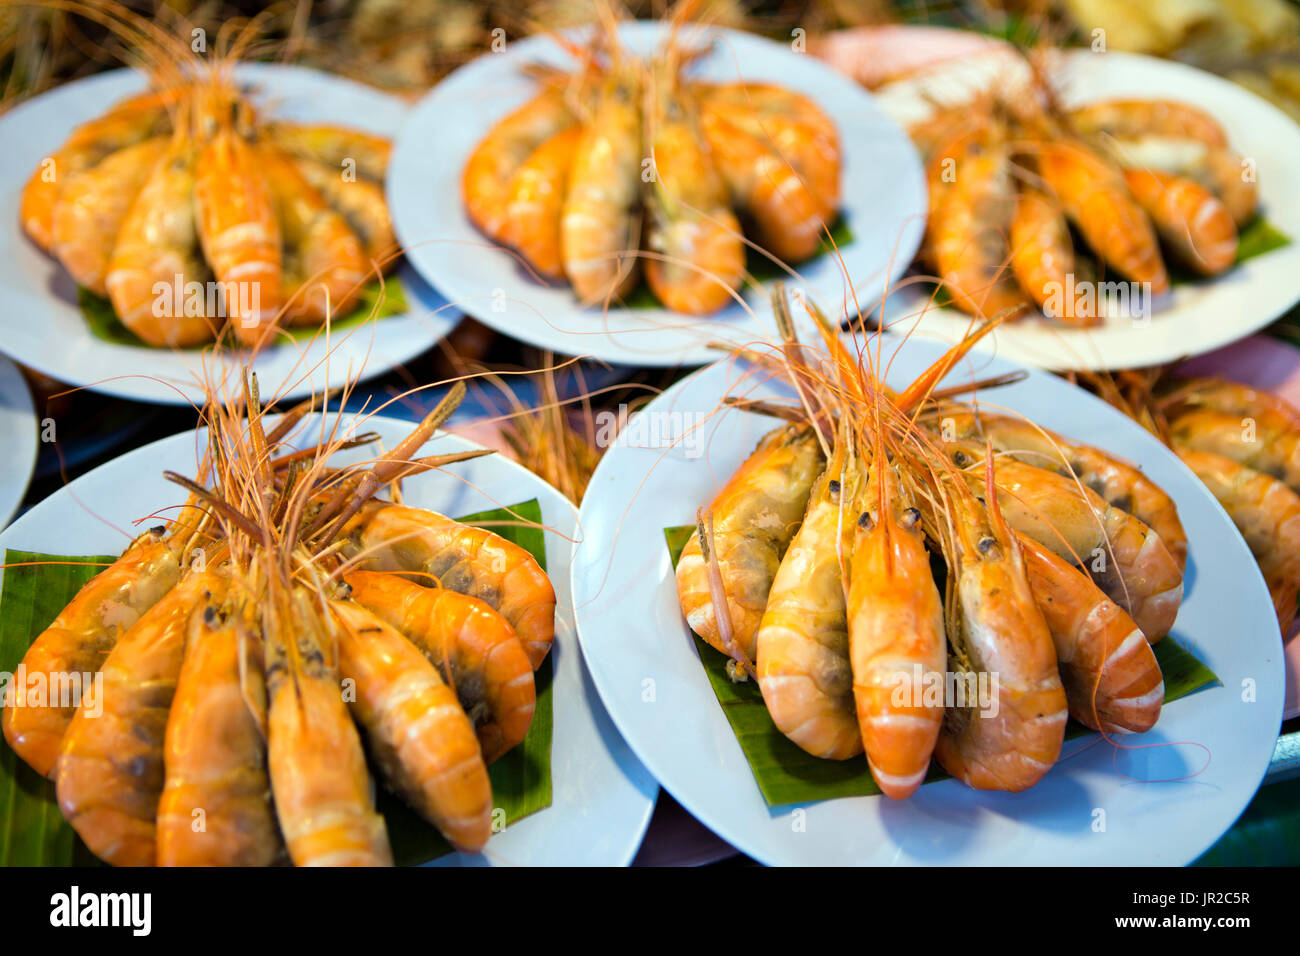 Thai seafood in a market stall. Stock Photo